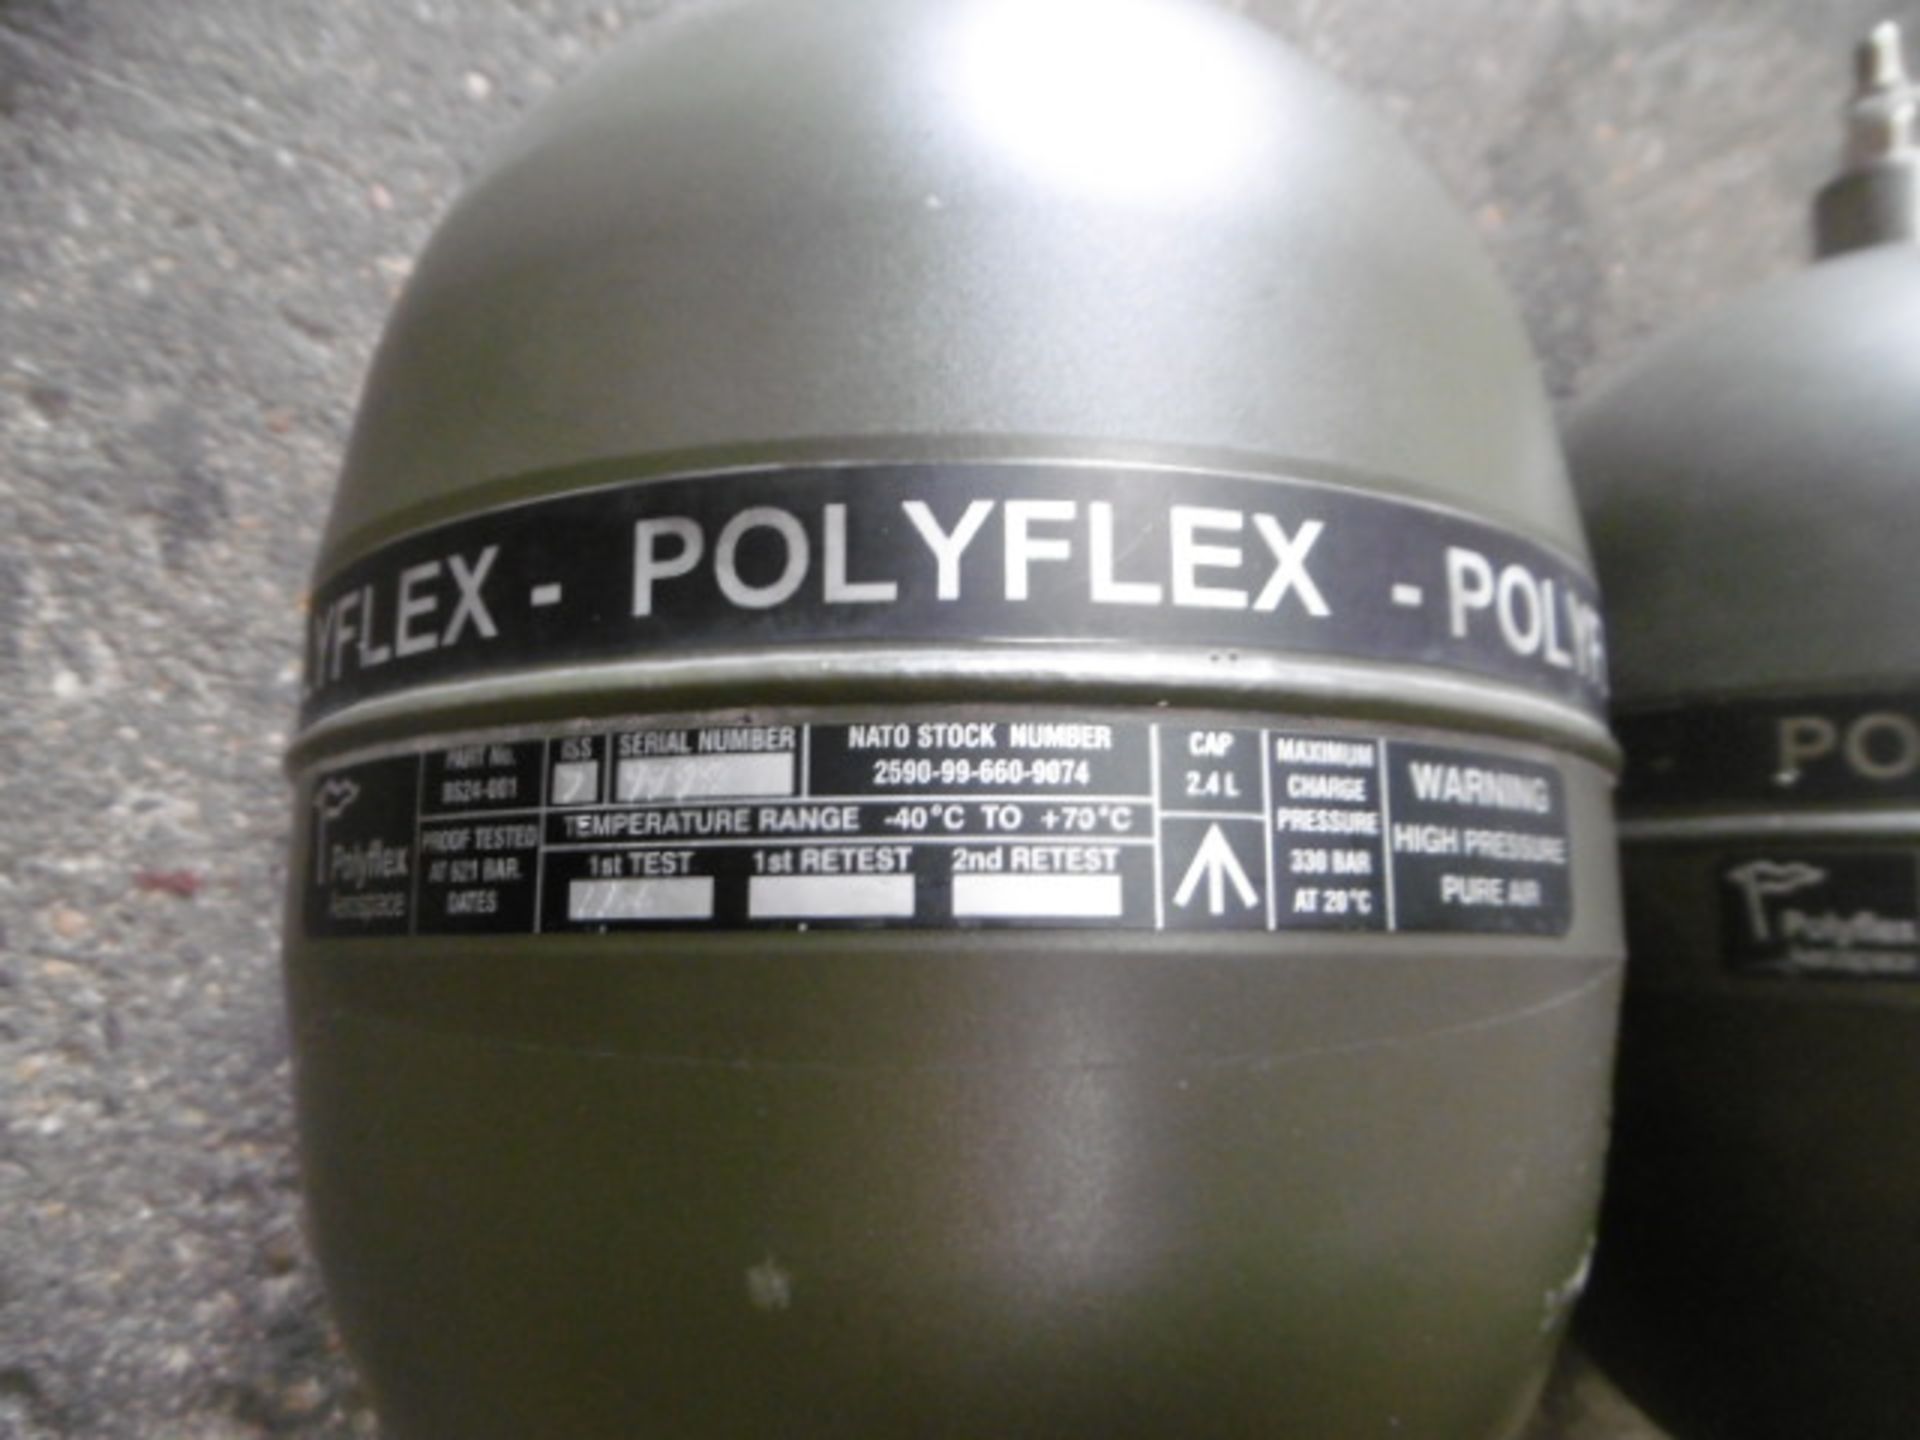 6 x Polyflex High Pressure Air Cannisters - Image 2 of 5